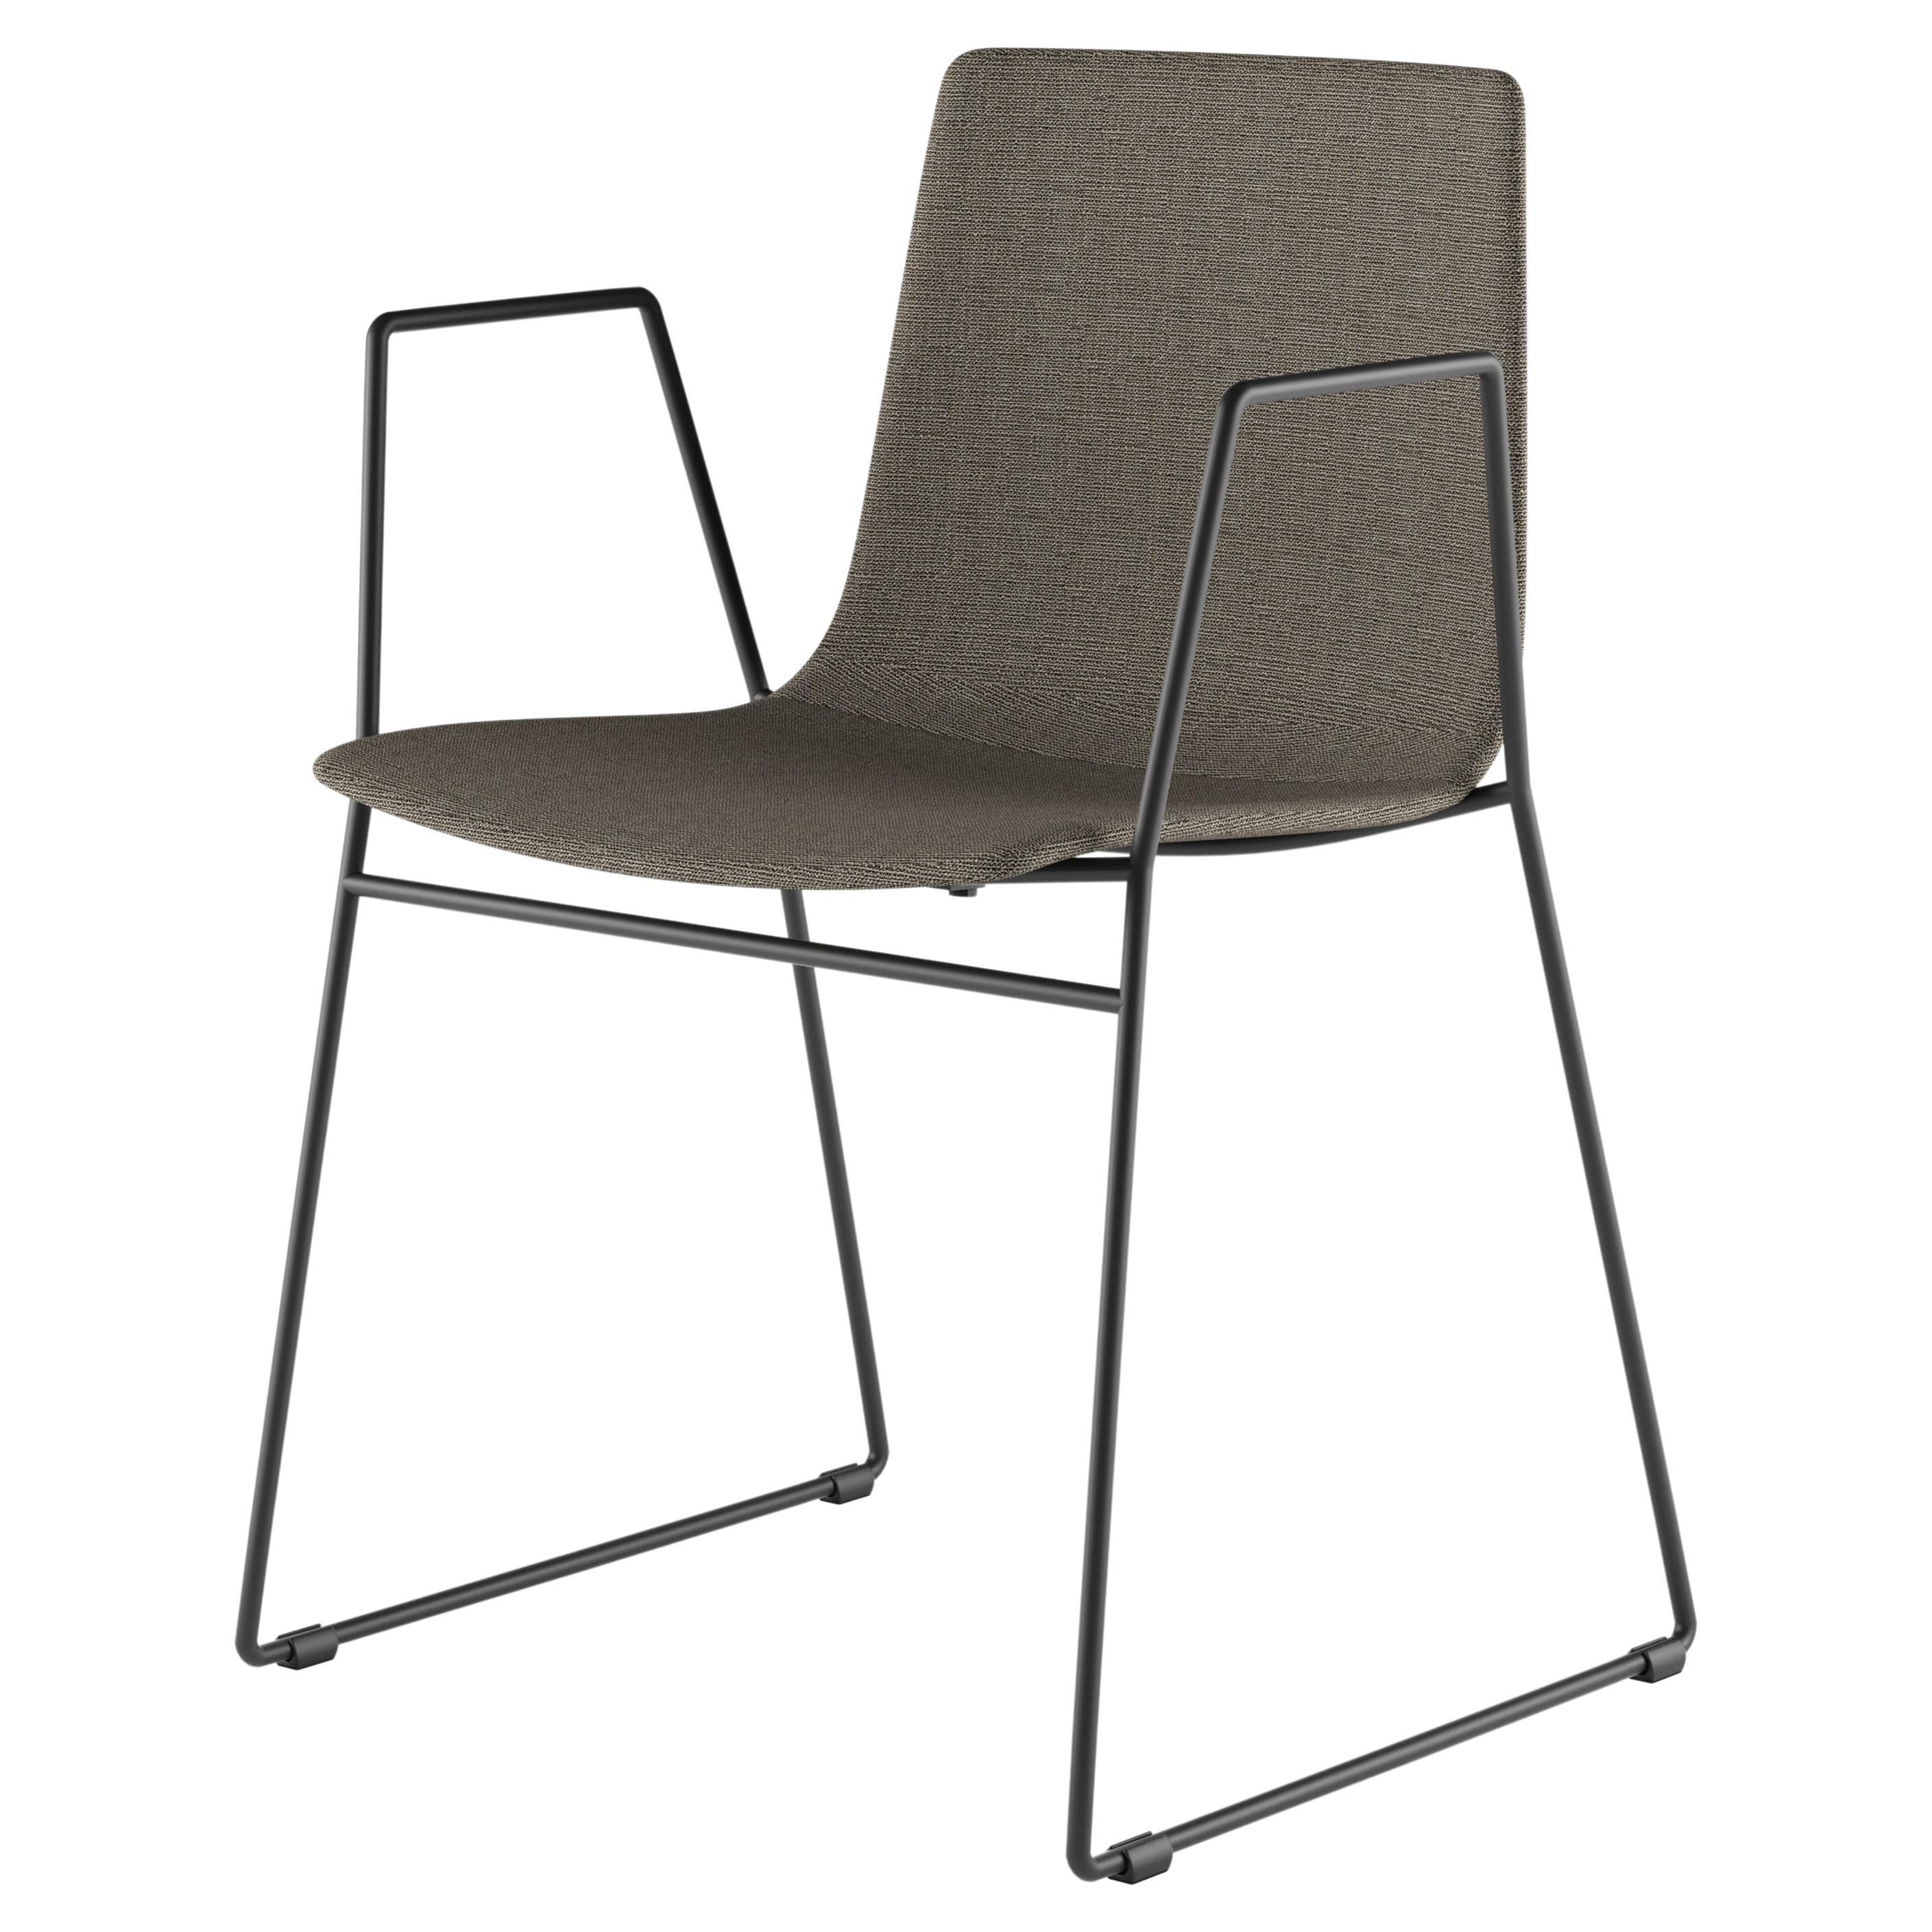 Alias 89L Slim Chair Sledge Arm Soft L in Brown with Black Lacquered Steel Frame